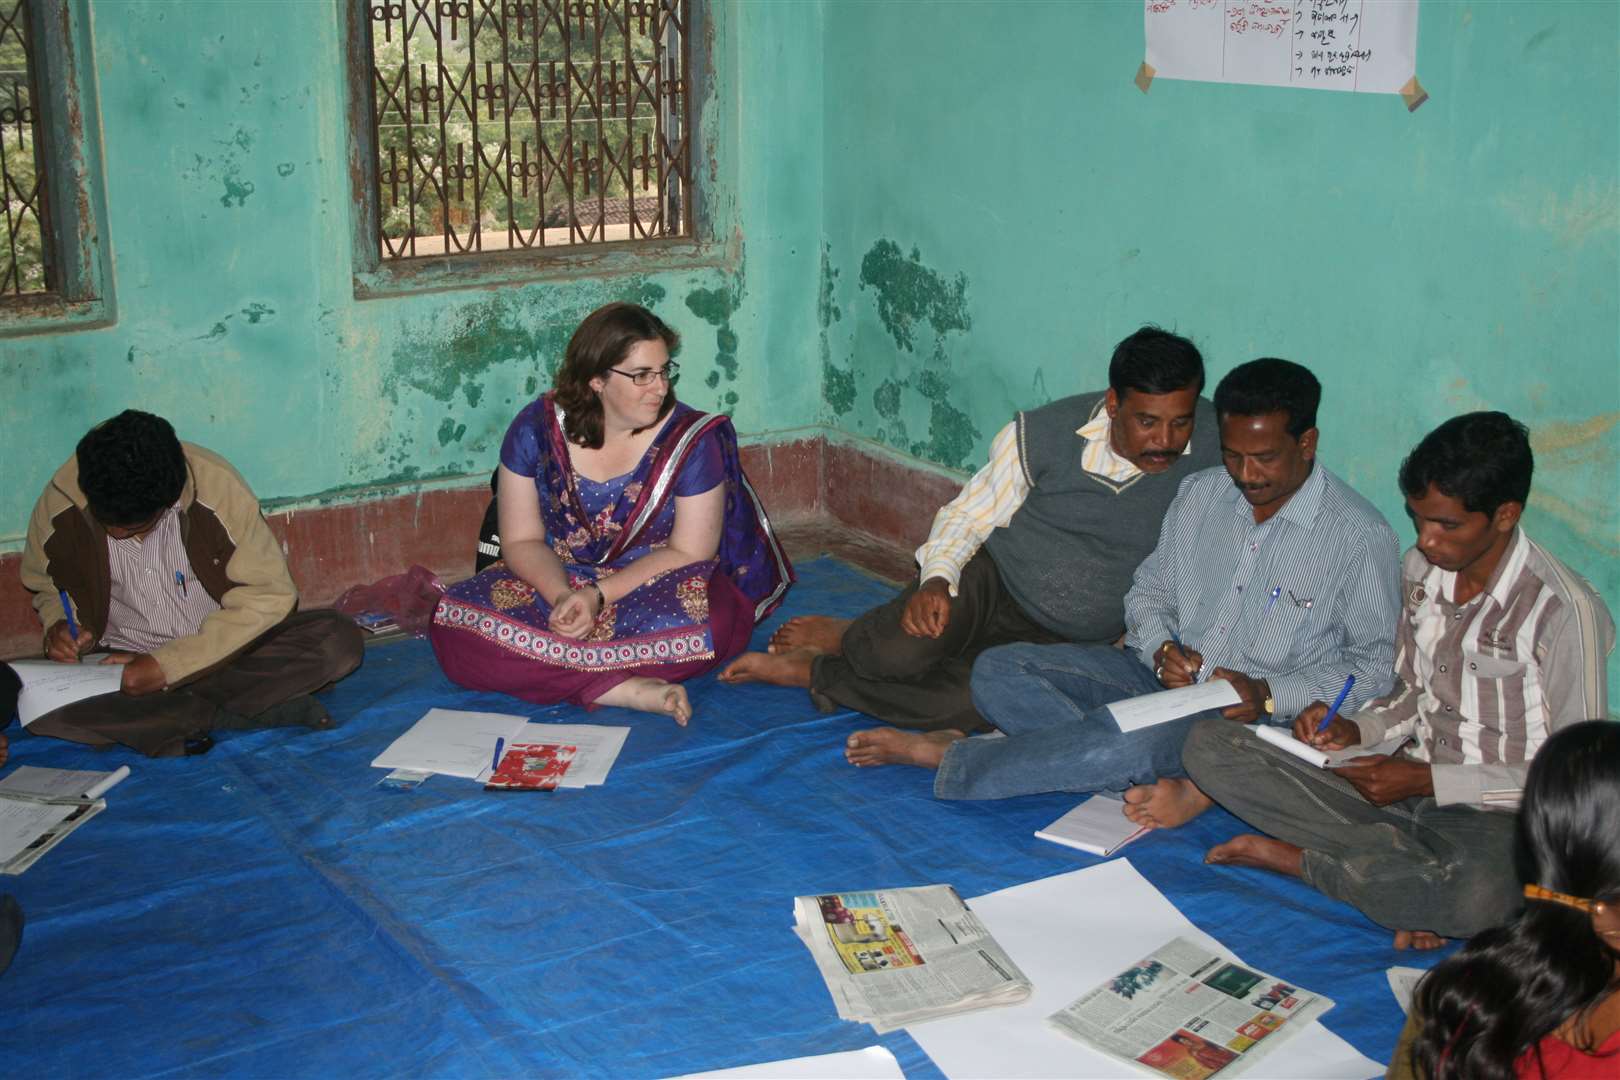 Claire Boxall, PR and communications manager at Golding Homes, in India doing voluntary service